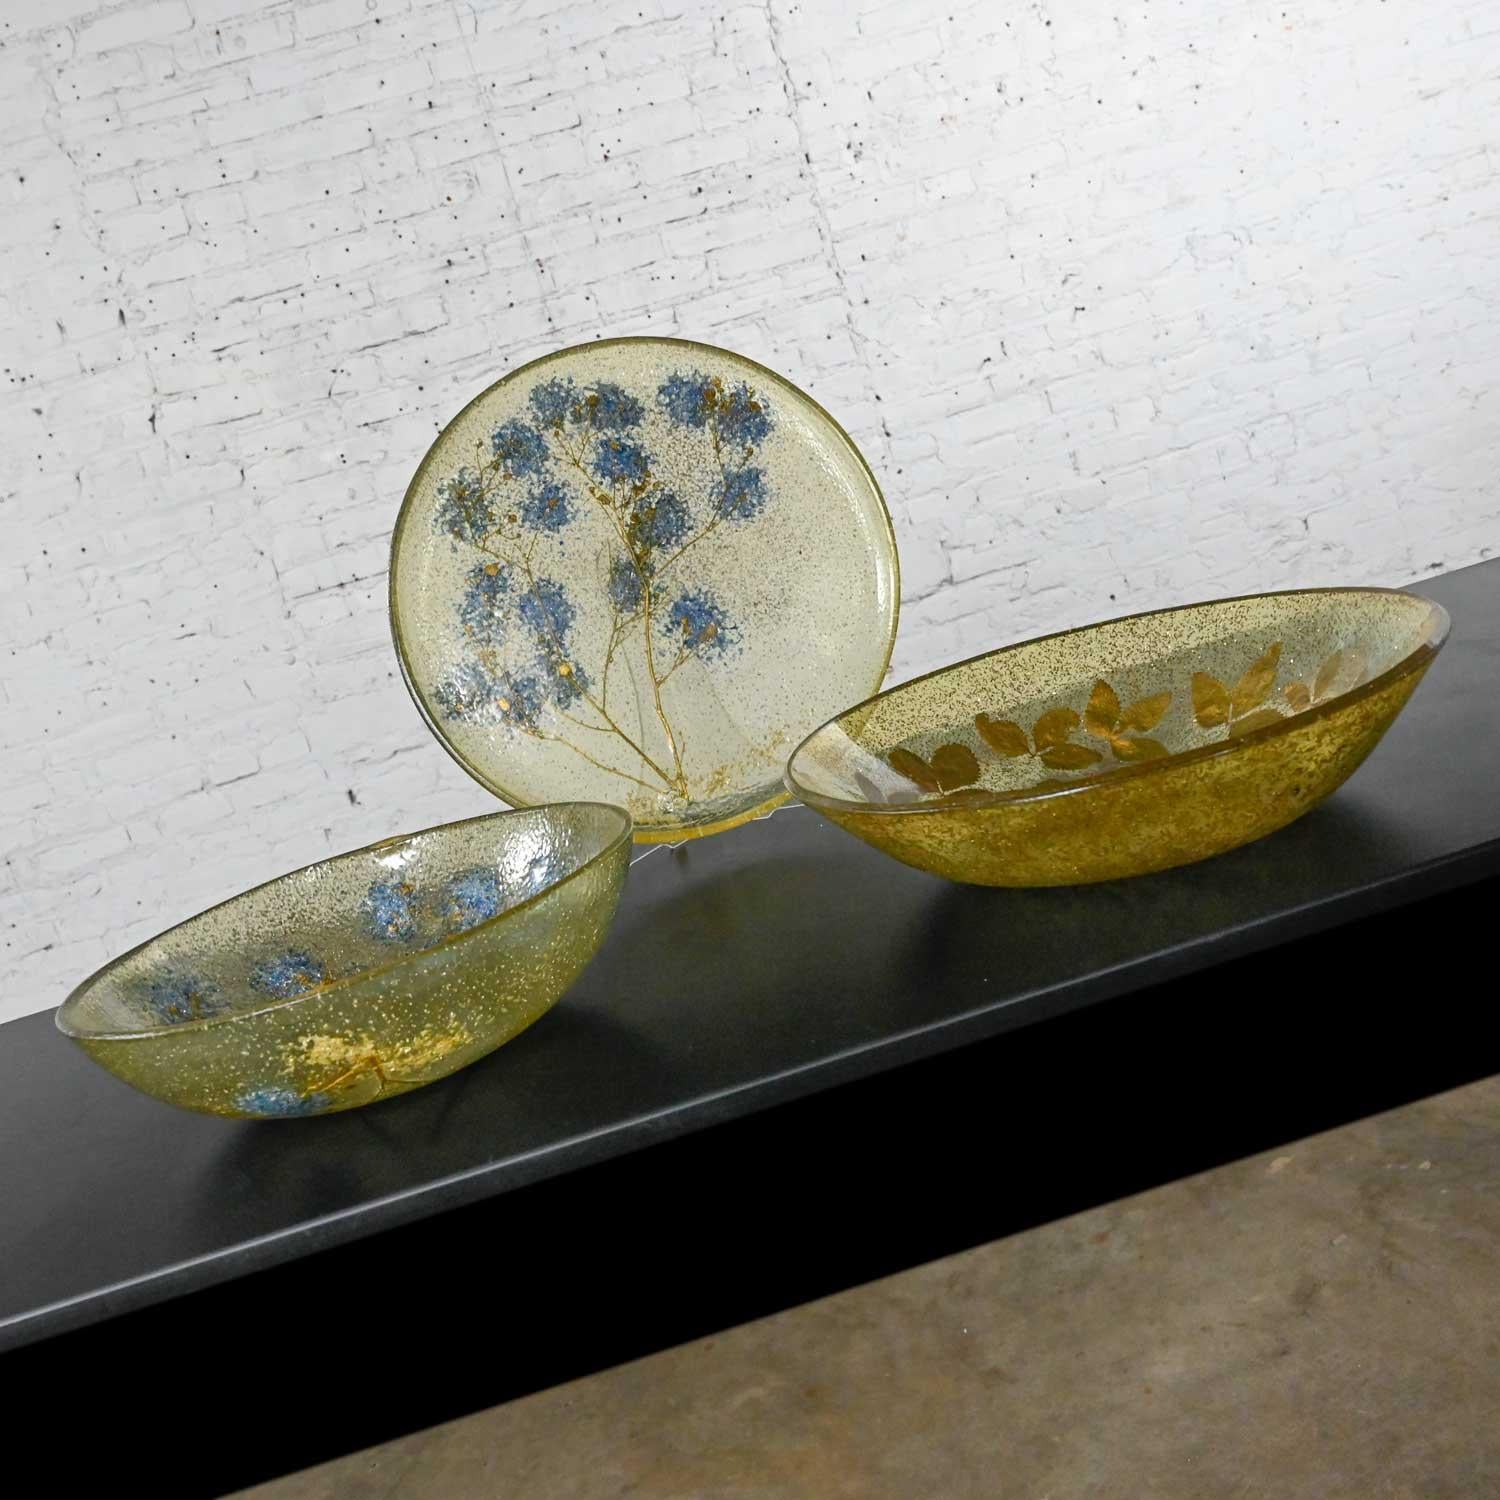 Lovely vintage mid-century modern pair of transparent goldish molded pliable plastic bowls and a tray with blue flowers & gold stems, gold leaves, and gold glitter or gilt flecks. Beautiful condition, keeping in mind that these are vintage and not